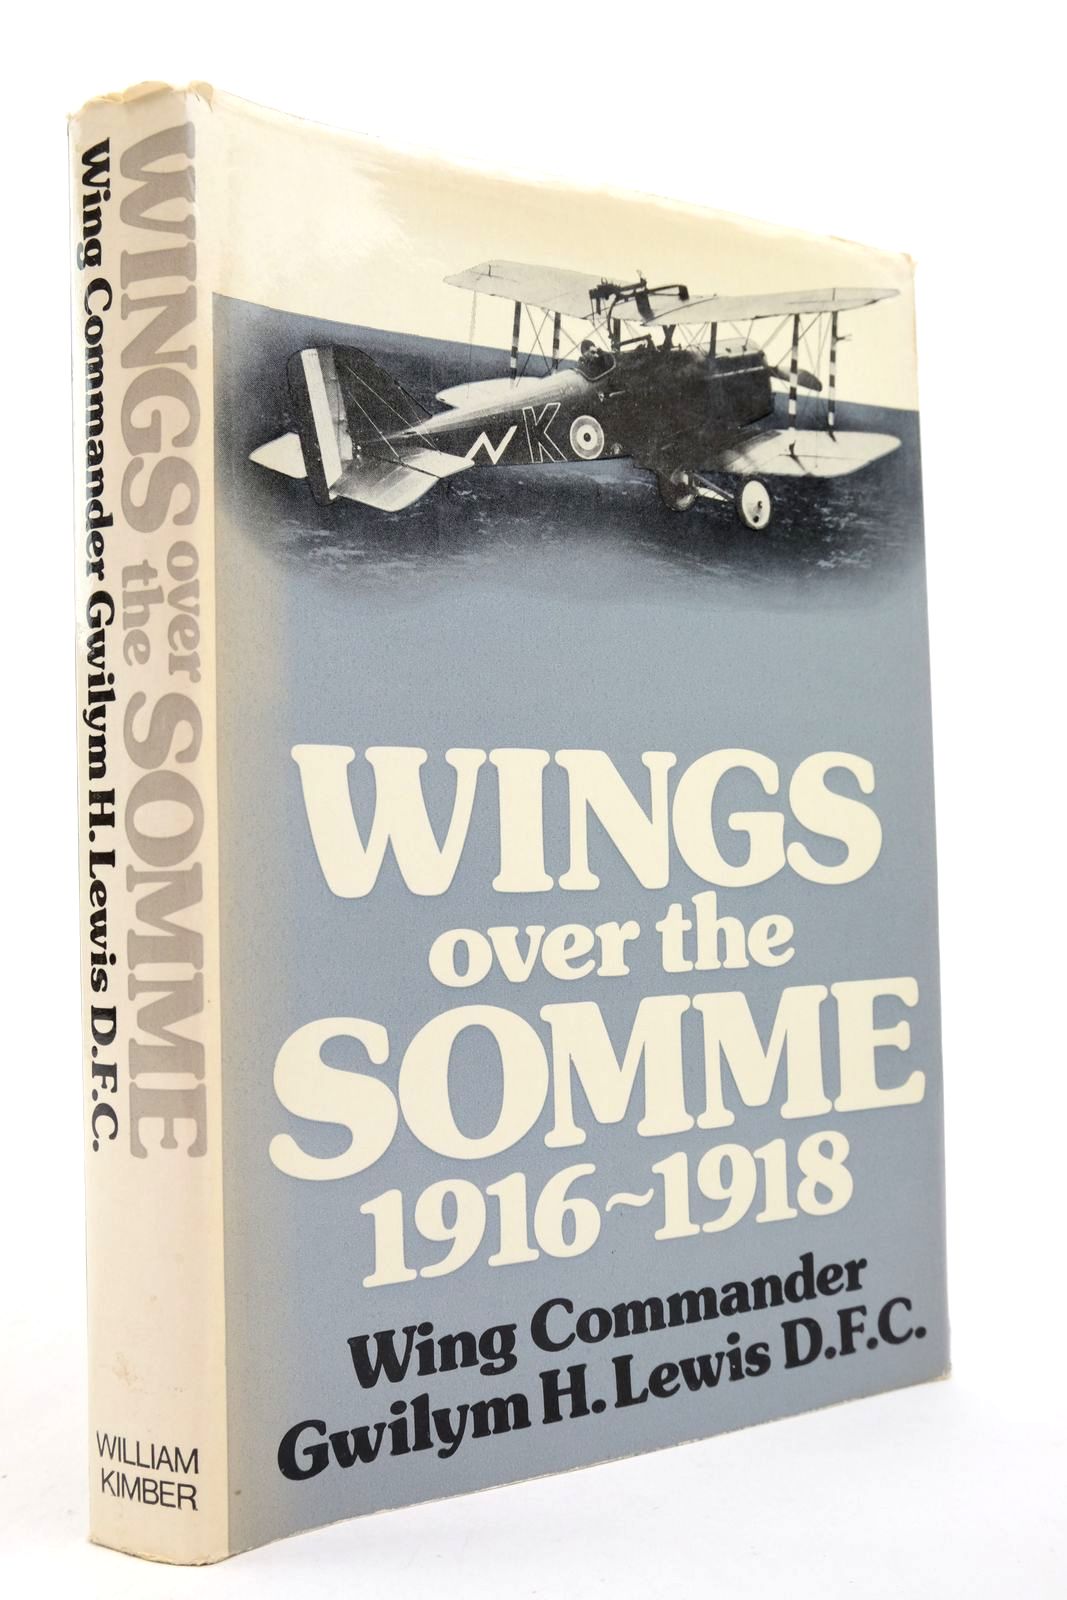 Photo of WINGS OVER THE SOMME 1916-1918 written by Lewis, G.H. published by William Kimber (STOCK CODE: 2140052)  for sale by Stella & Rose's Books